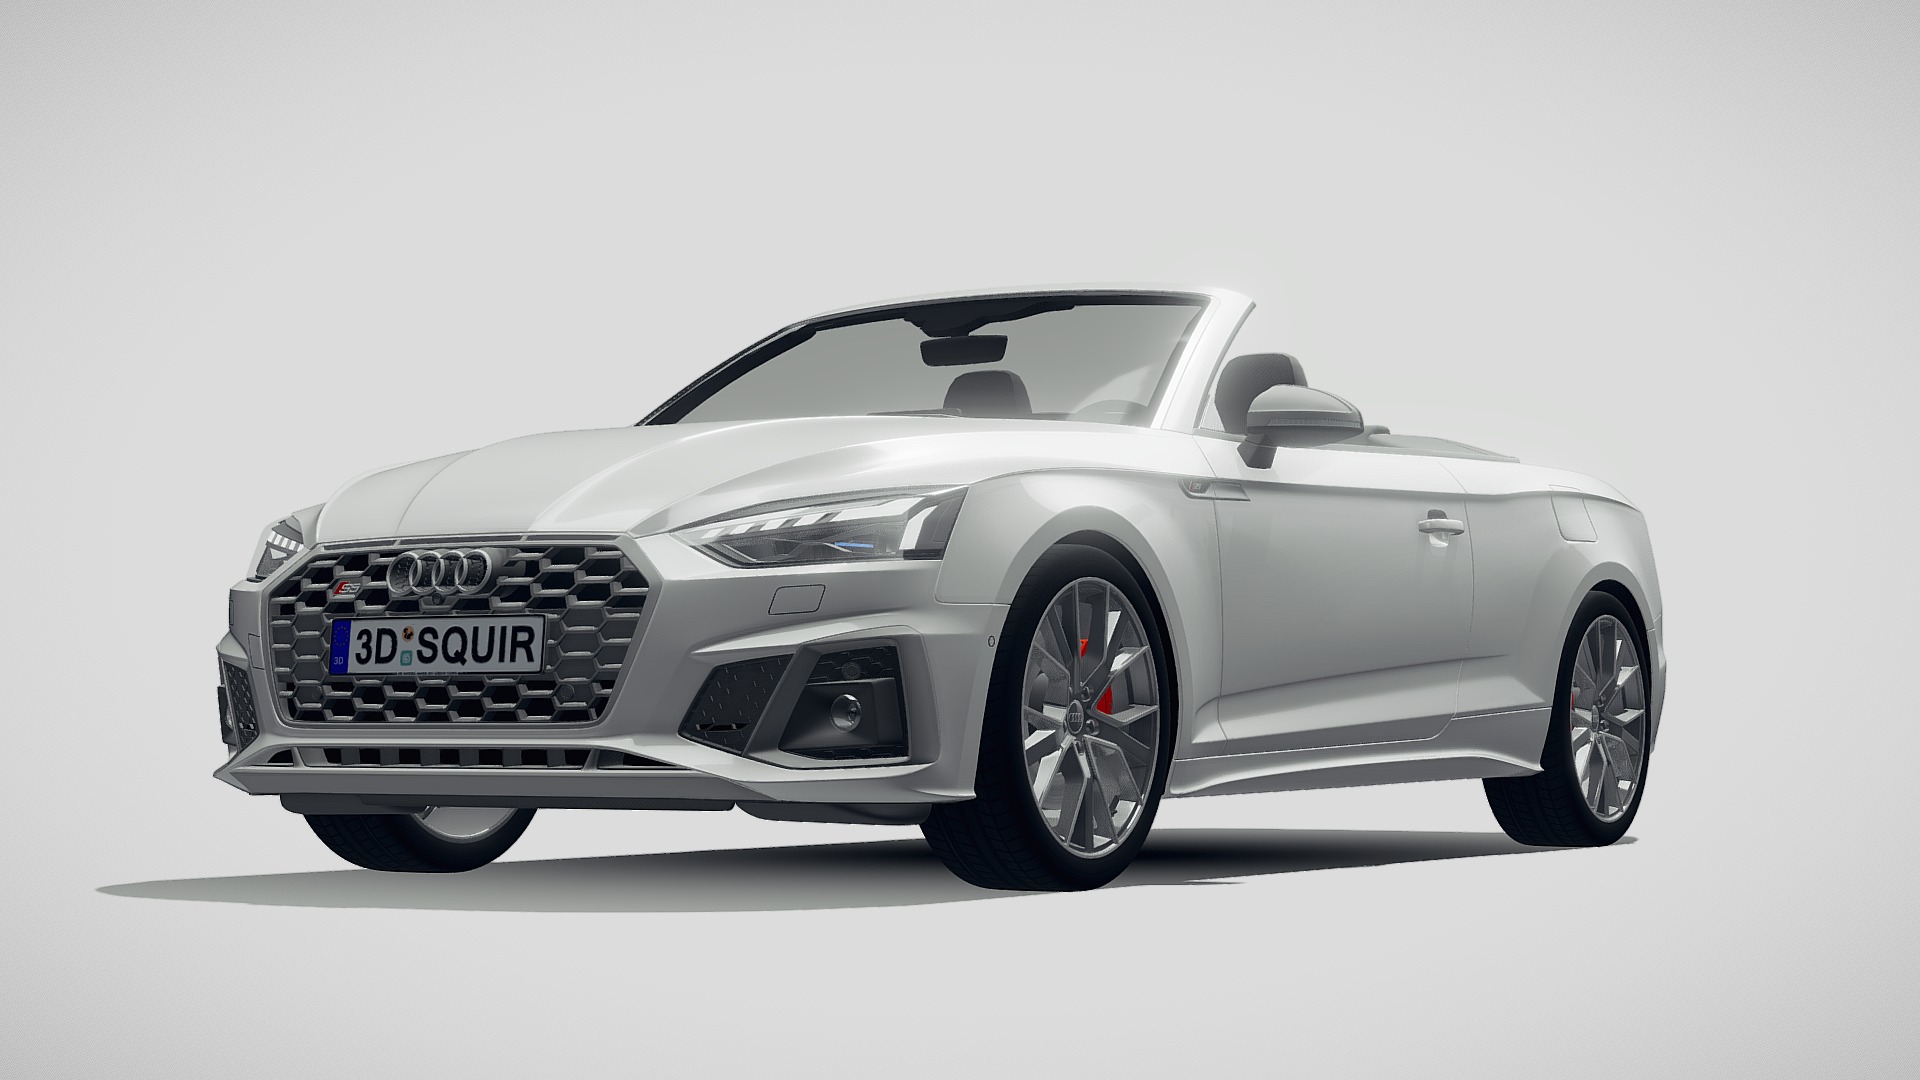 3D model Audi S5 Cabrio 2020 - This is a 3D model of the Audi S5 Cabrio 2020. The 3D model is about a silver sports car.